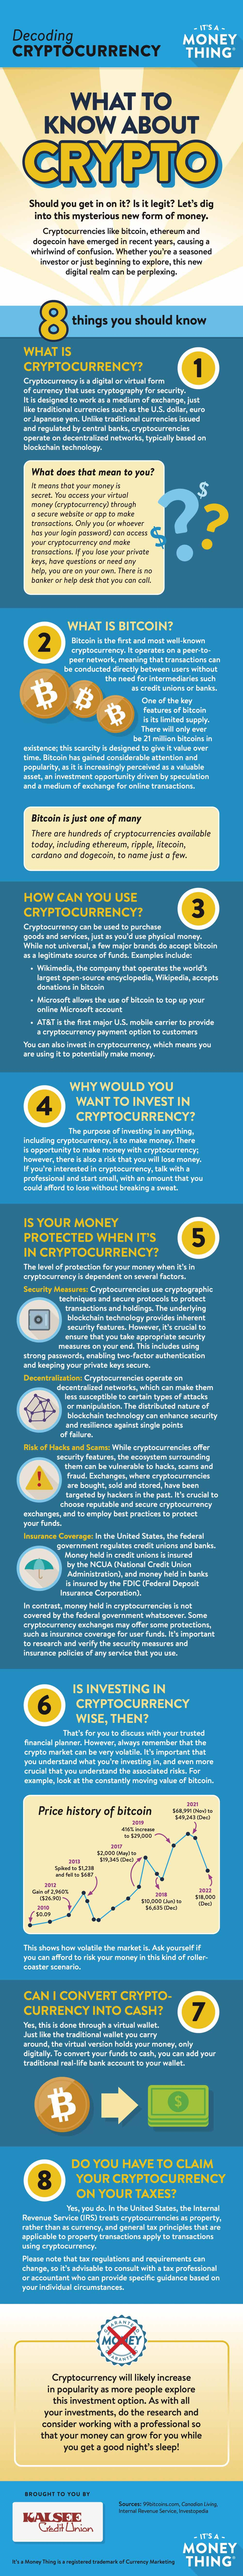 decoding cryptocurrency infographic